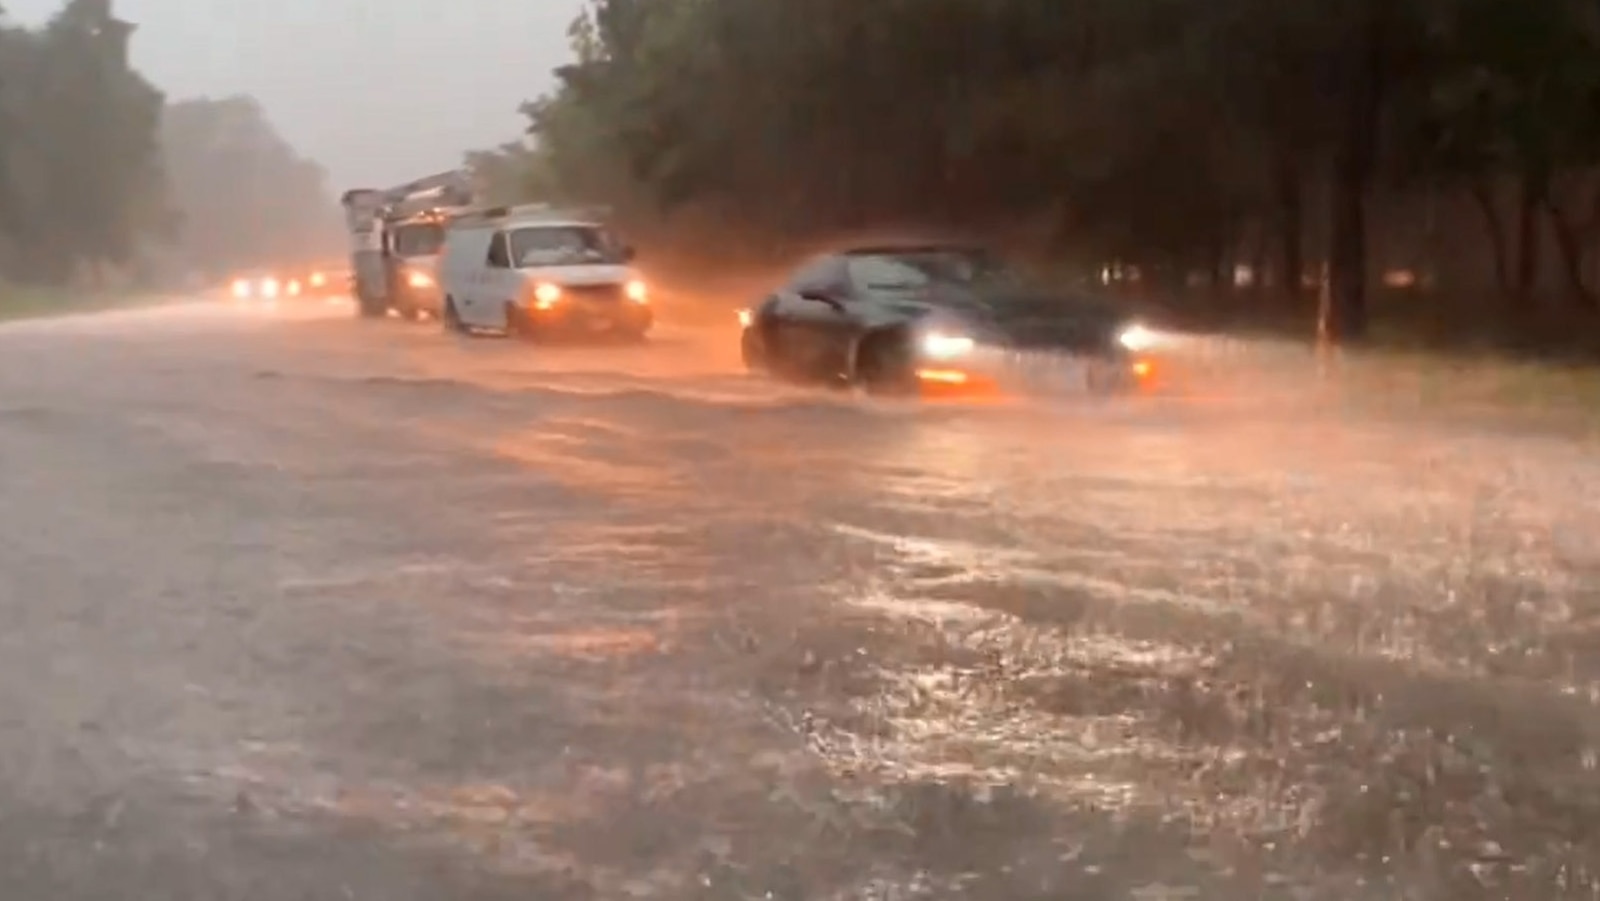 Houston area faces 'life-threatening' flood conditions as severe weather hits Texas